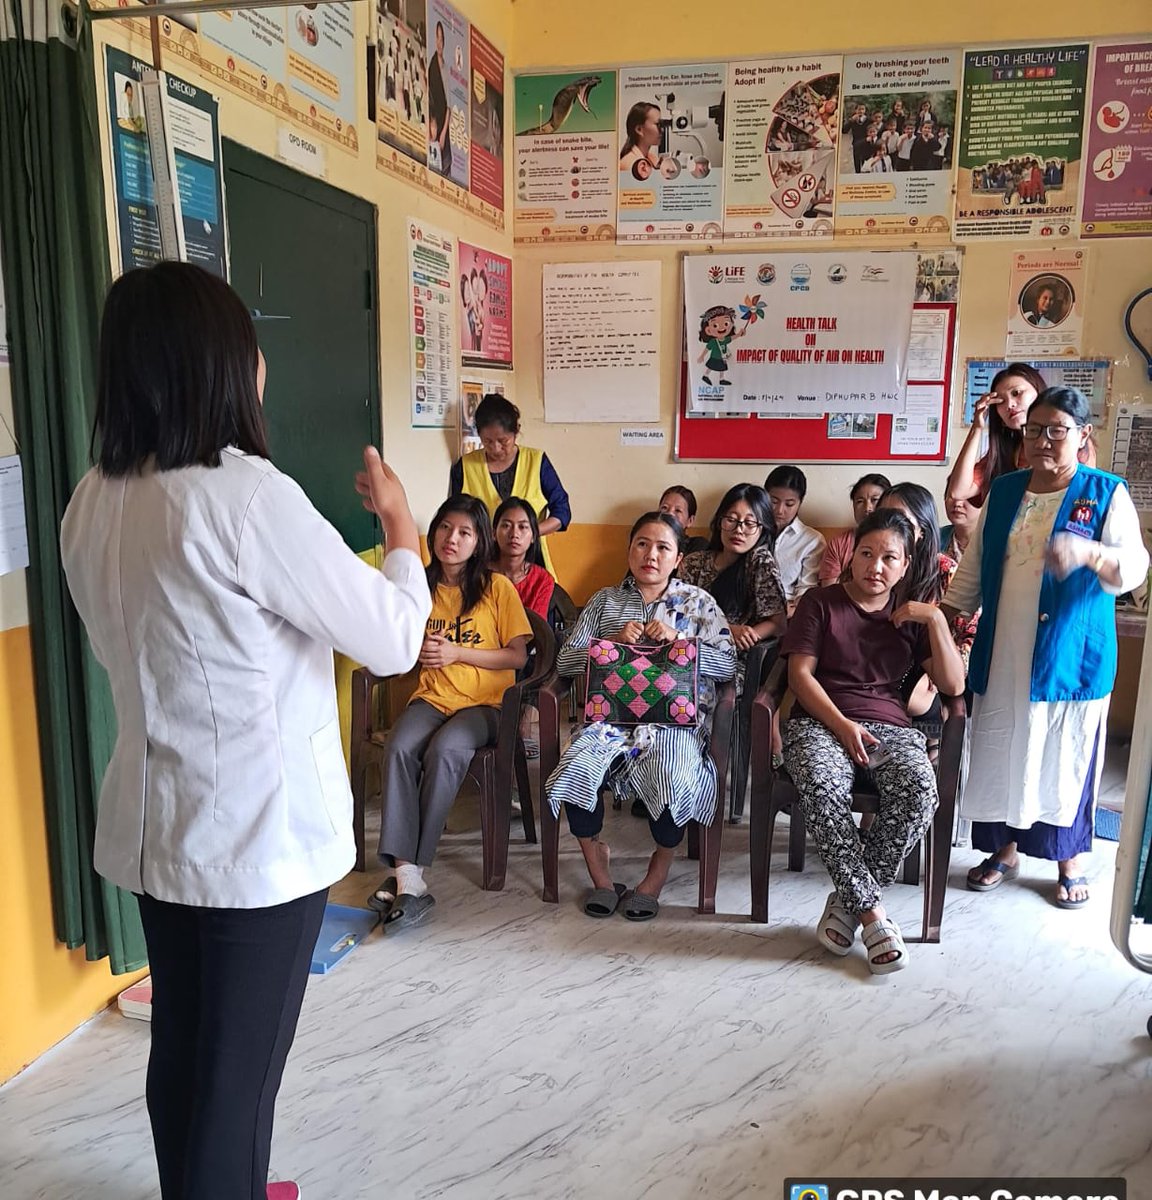 Breathing #cleanair isn't just a privilege, it's a necessity for #goodhealth. In #Nagaland, #CommunityHealthOfficer led an enlightening discussion on the critical link between air quality & well-being. Let's take action to ensure #CleanAirForAll because our health depends on it!